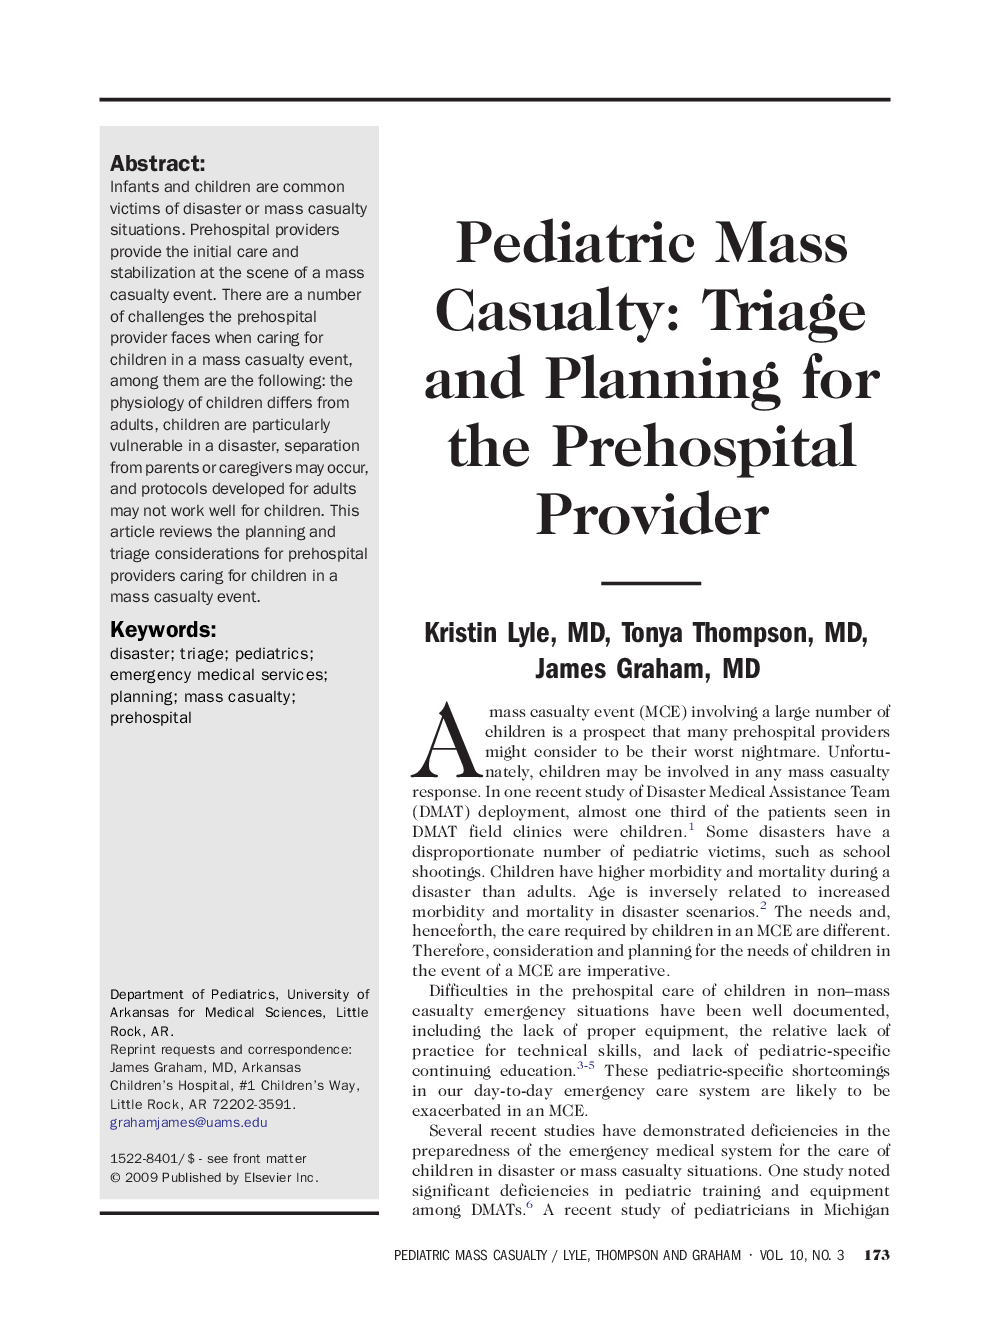 Pediatric Mass Casualty: Triage and Planning for the Prehospital Provider